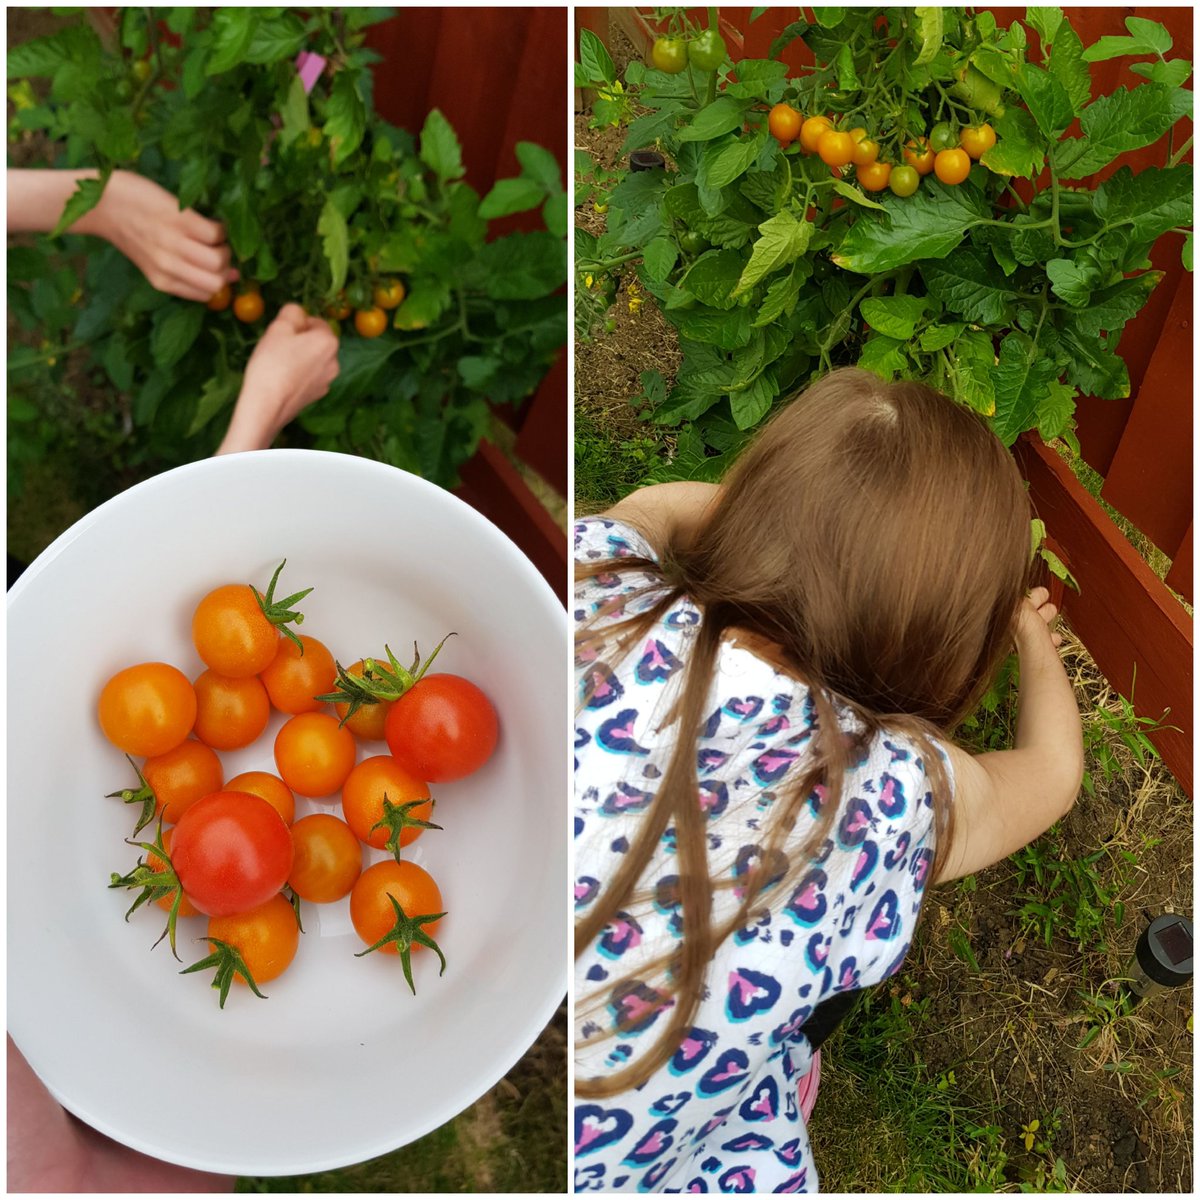 I've got a little helper picking some tomatoes with me today! This tomato plant in particular, just keeps on giving! 🍅 #newtogardening #sungoldtomatoes 
#SundayFunday